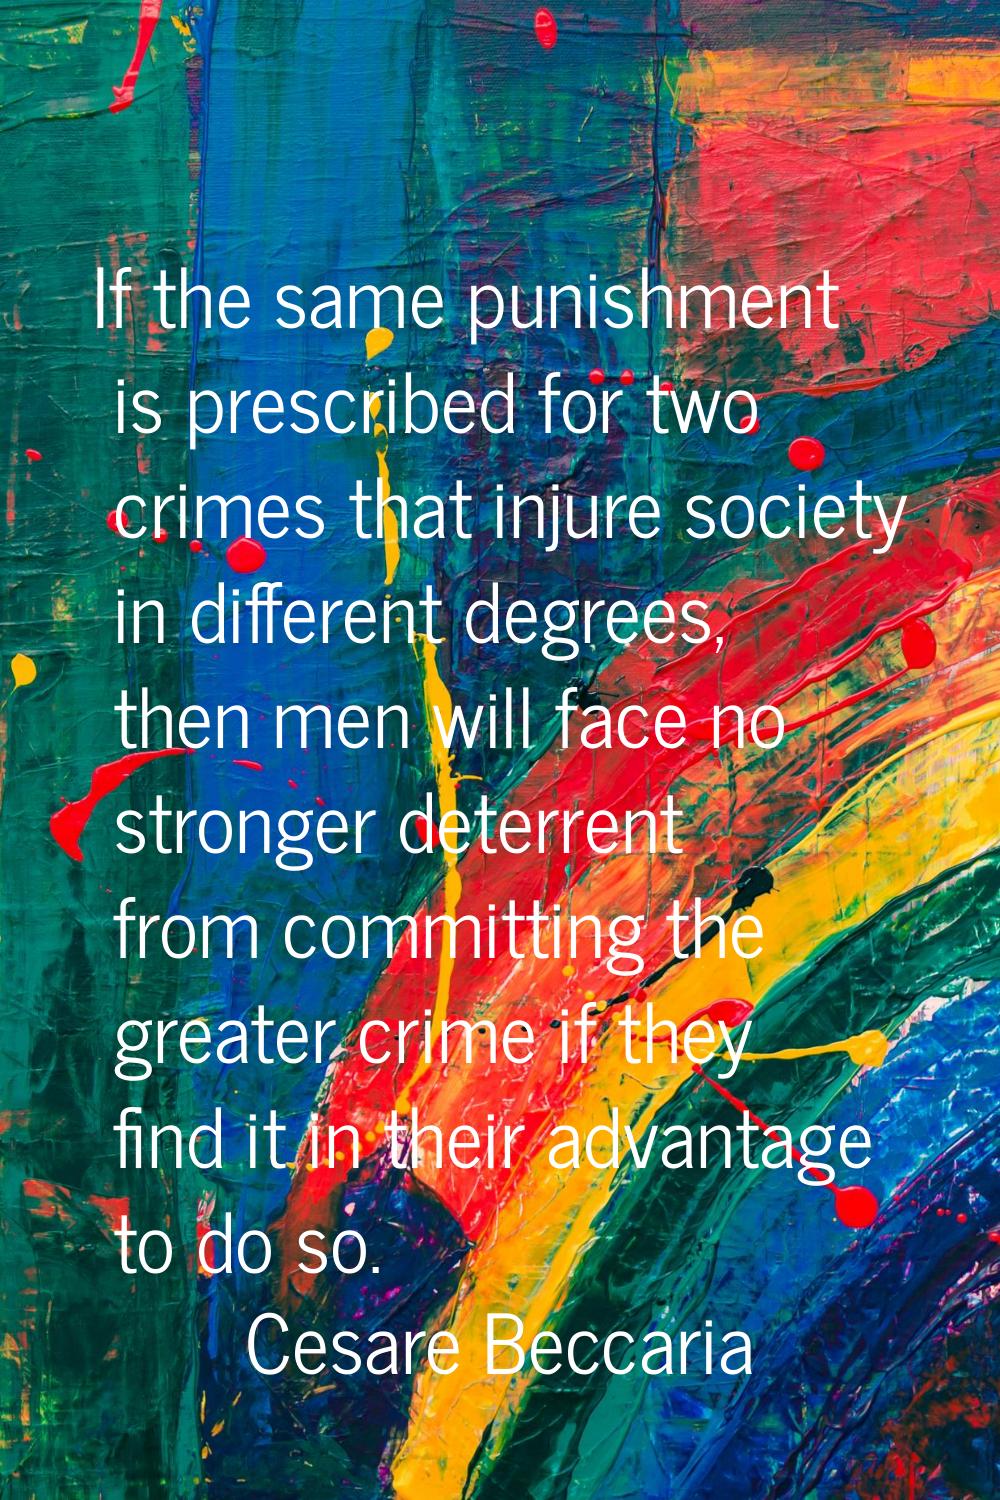 If the same punishment is prescribed for two crimes that injure society in different degrees, then 